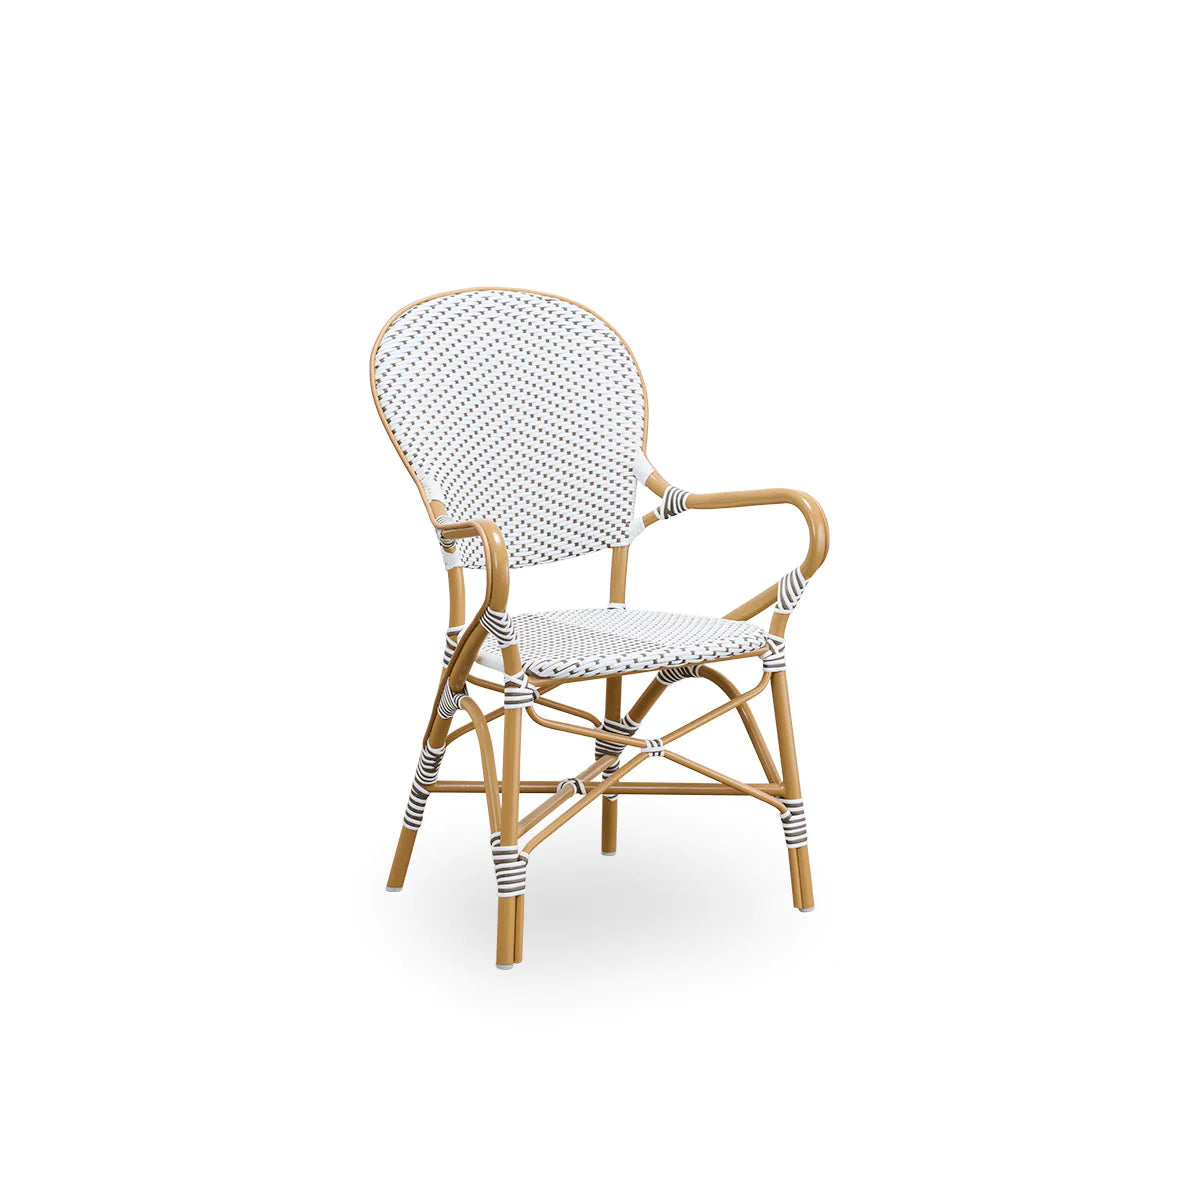 Sika Design Isabel Exterior online her, – 1000Chairs